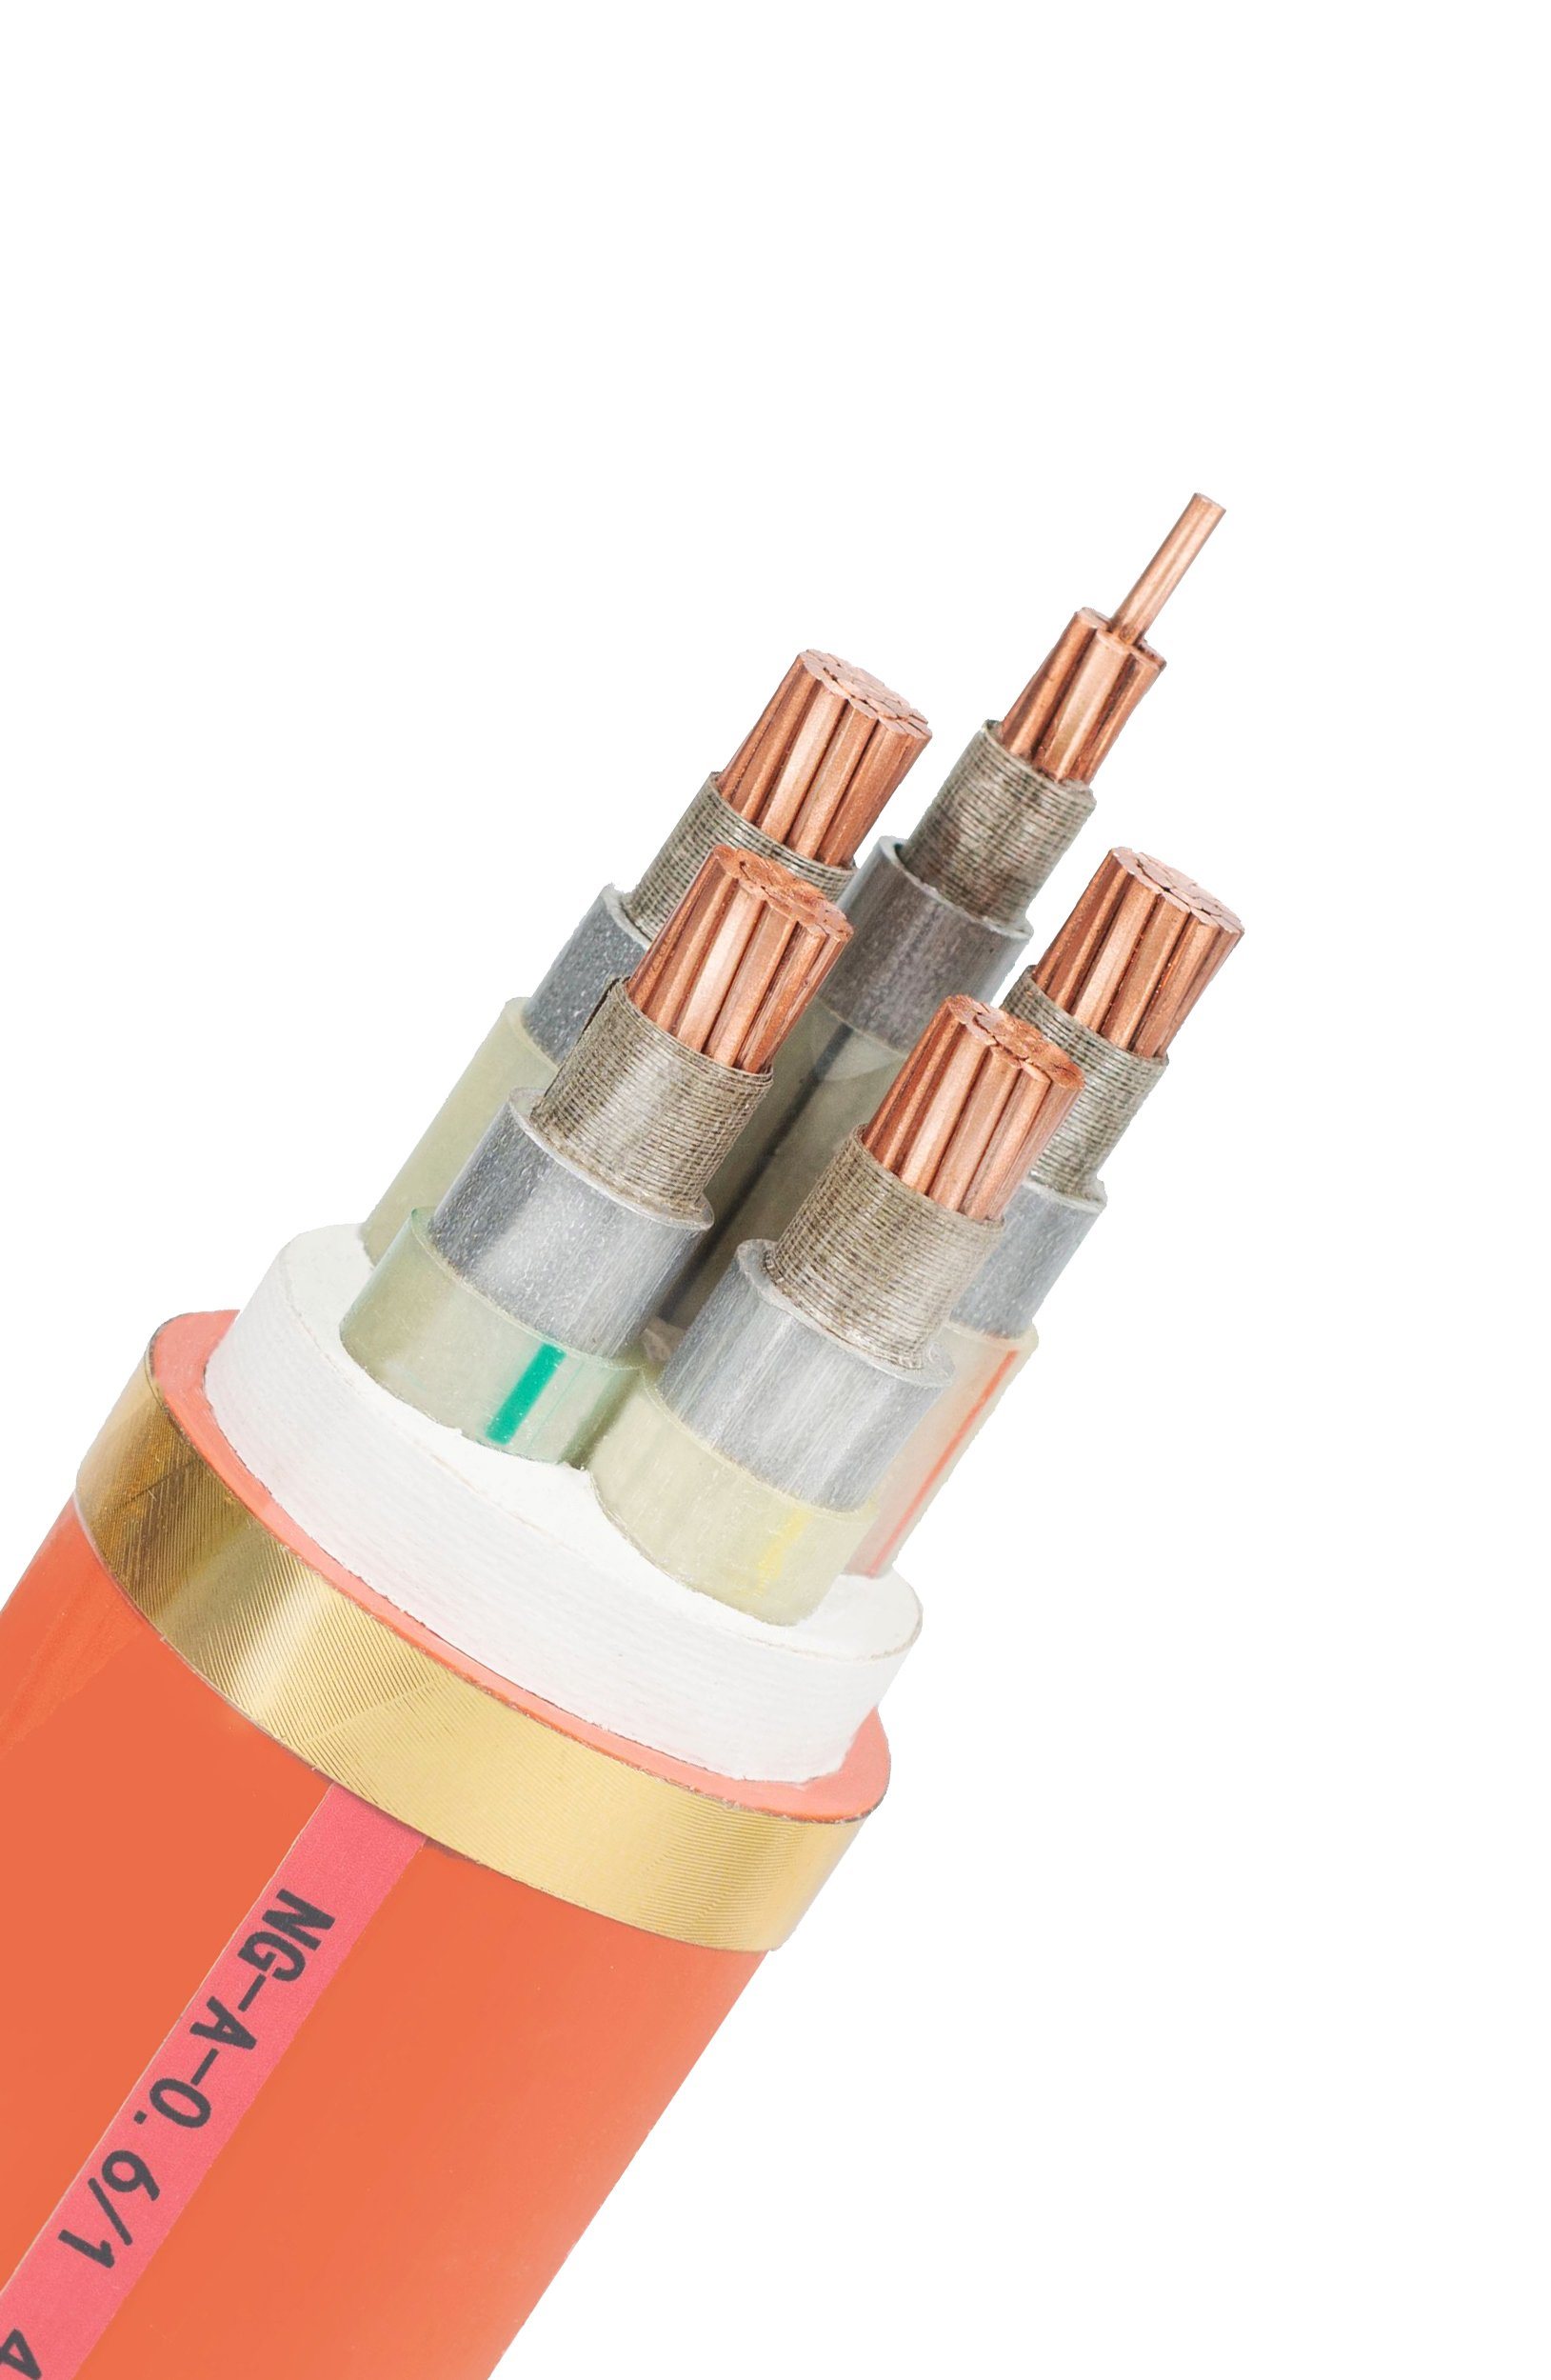 Fire Resistant Copper Cable PVC XLPE or Silicone Rubber Insulated PV Solar Electrical Wire Earth Control Flat Flexible Electric Power Cable